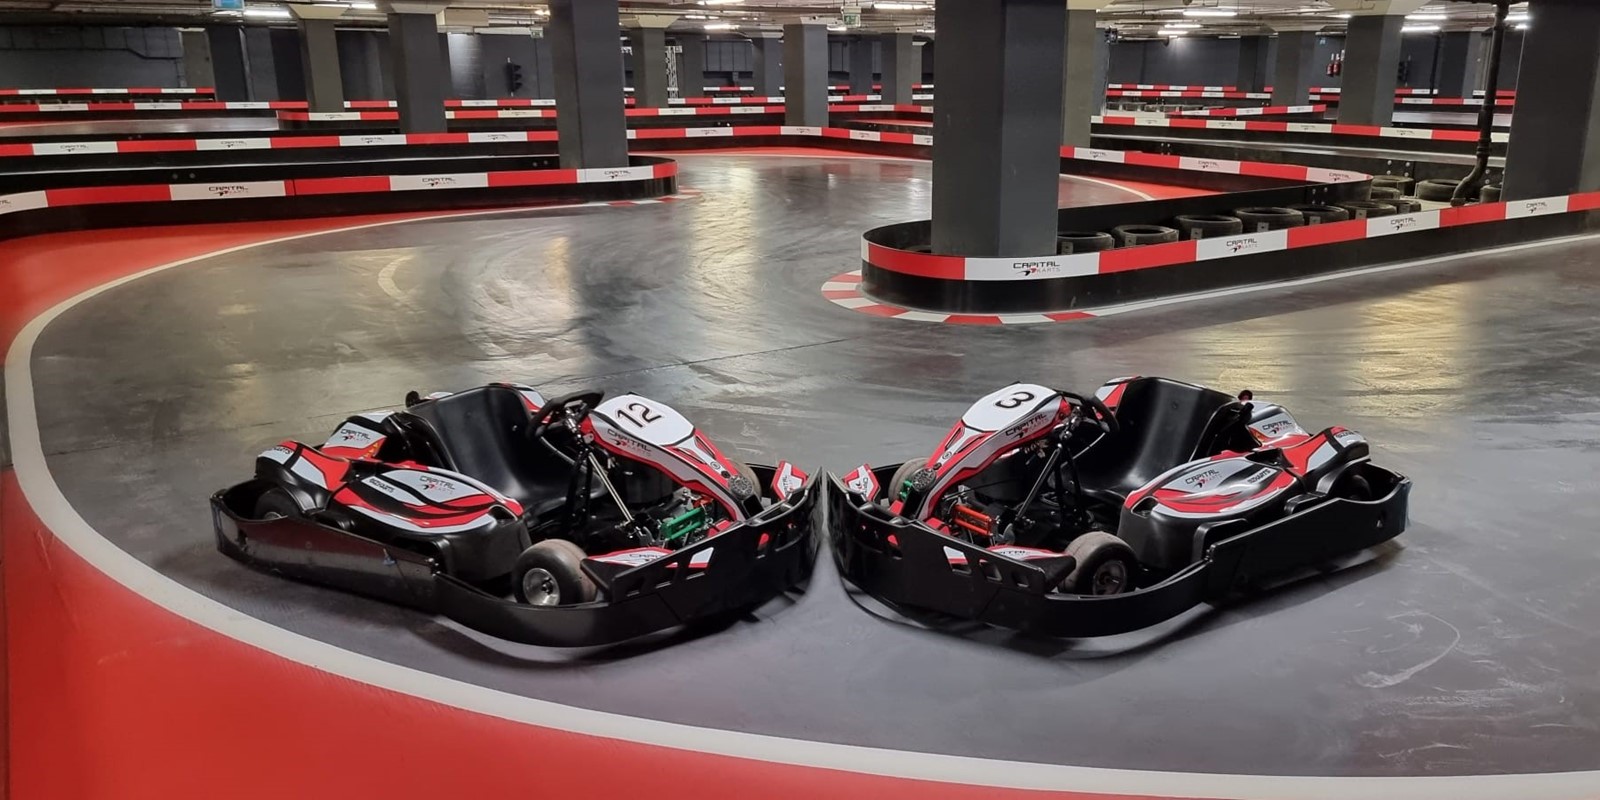 The 8 Best Electric Motors for Go-Karts